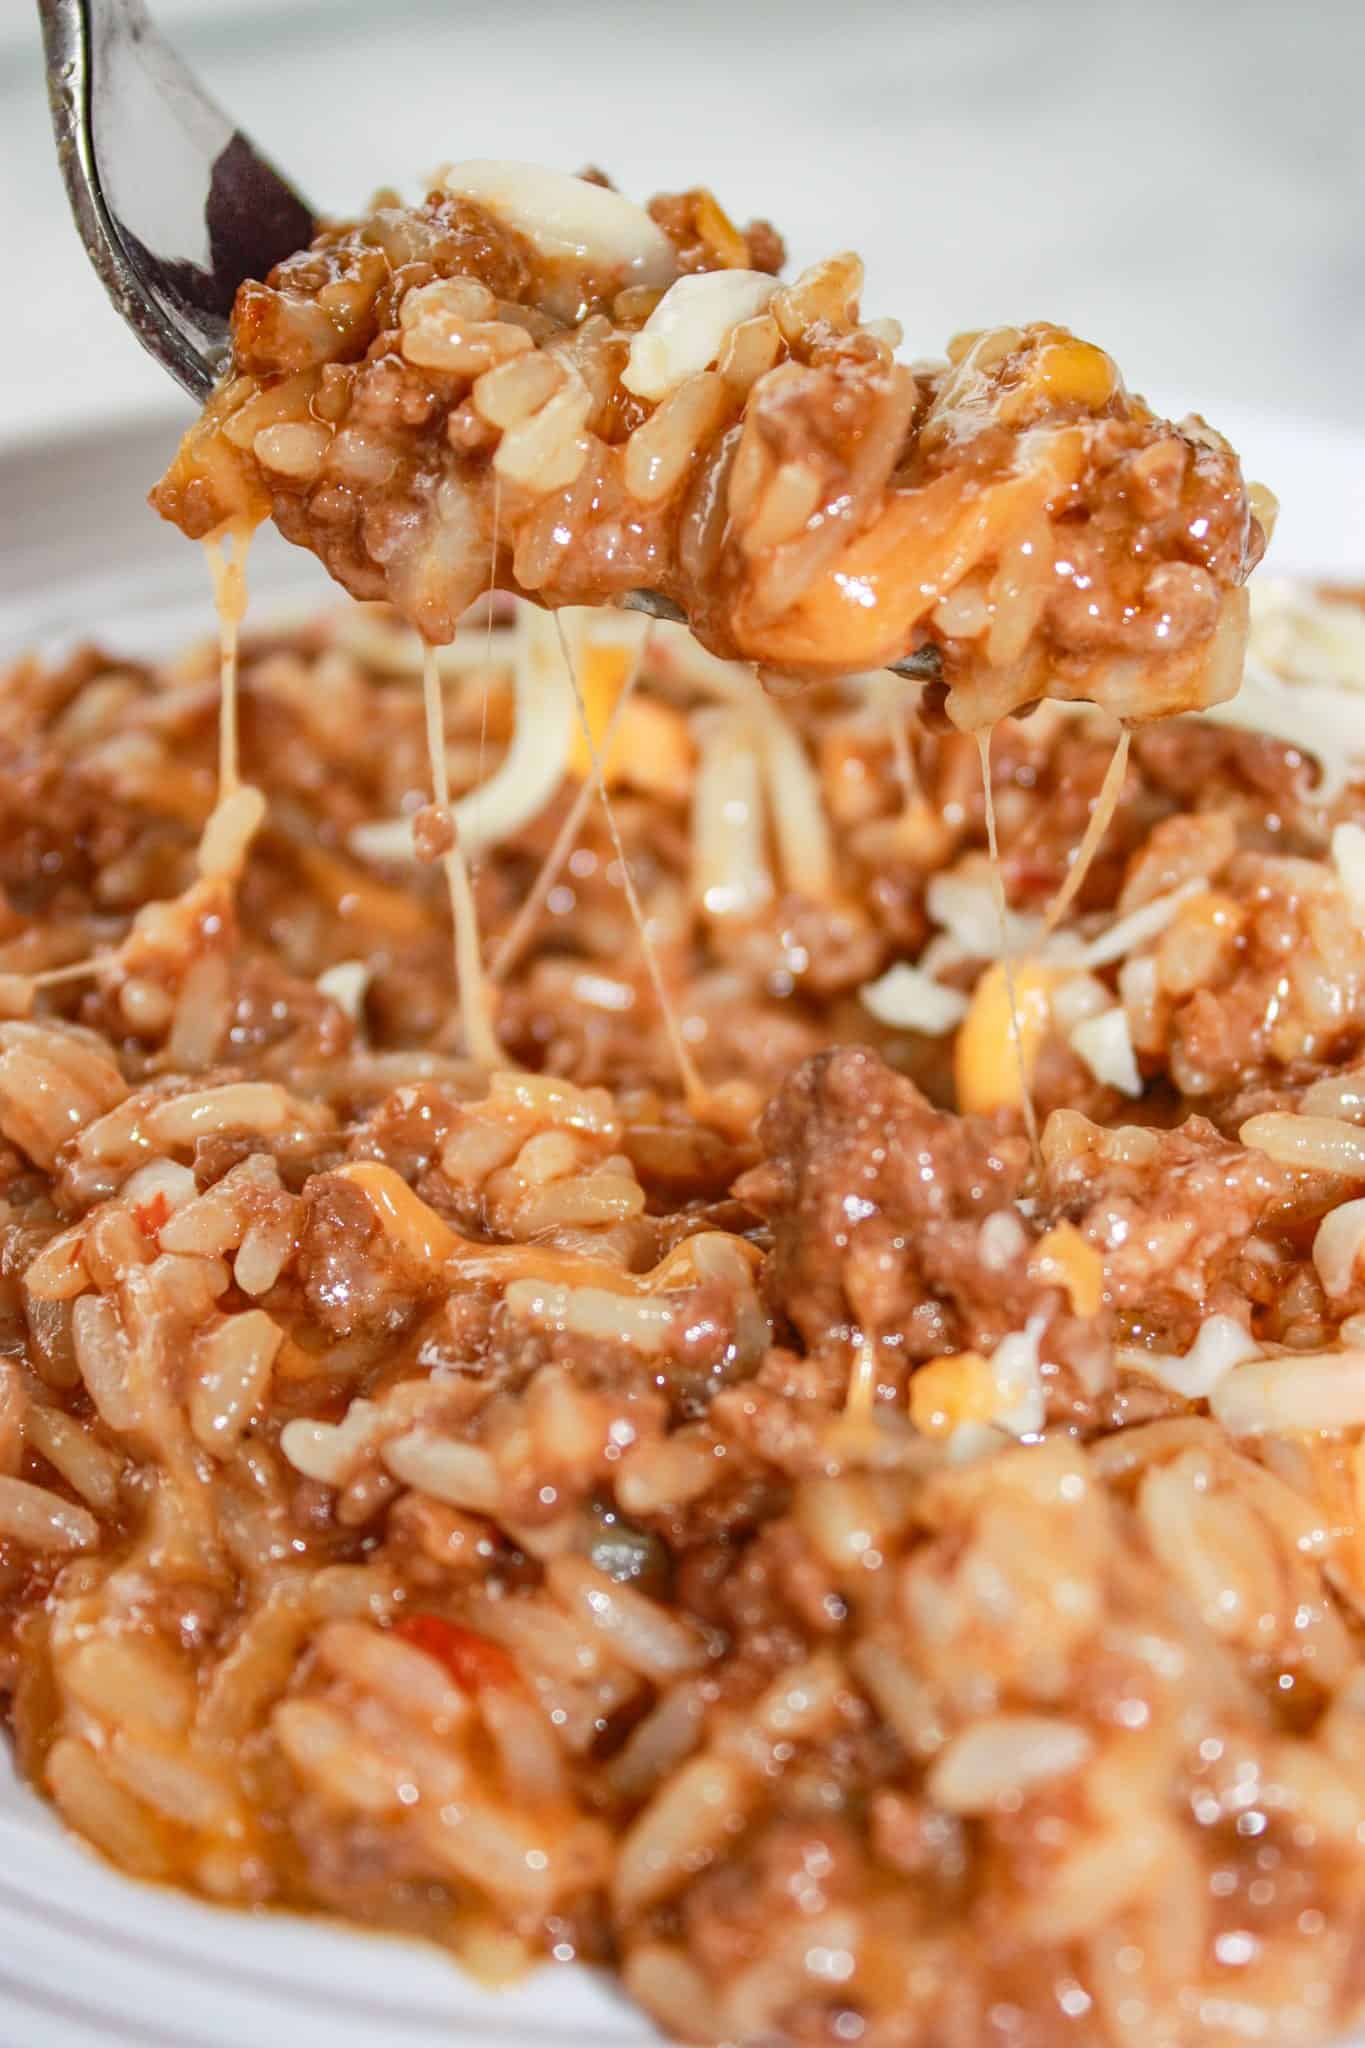 Instant Pot Cheesy BBQ Ground Beef and Rice can be on your table in short order any day of the week.  It is a enrobed in a delightful sauce that is a combination of sweet and smoky with a bit of heat.